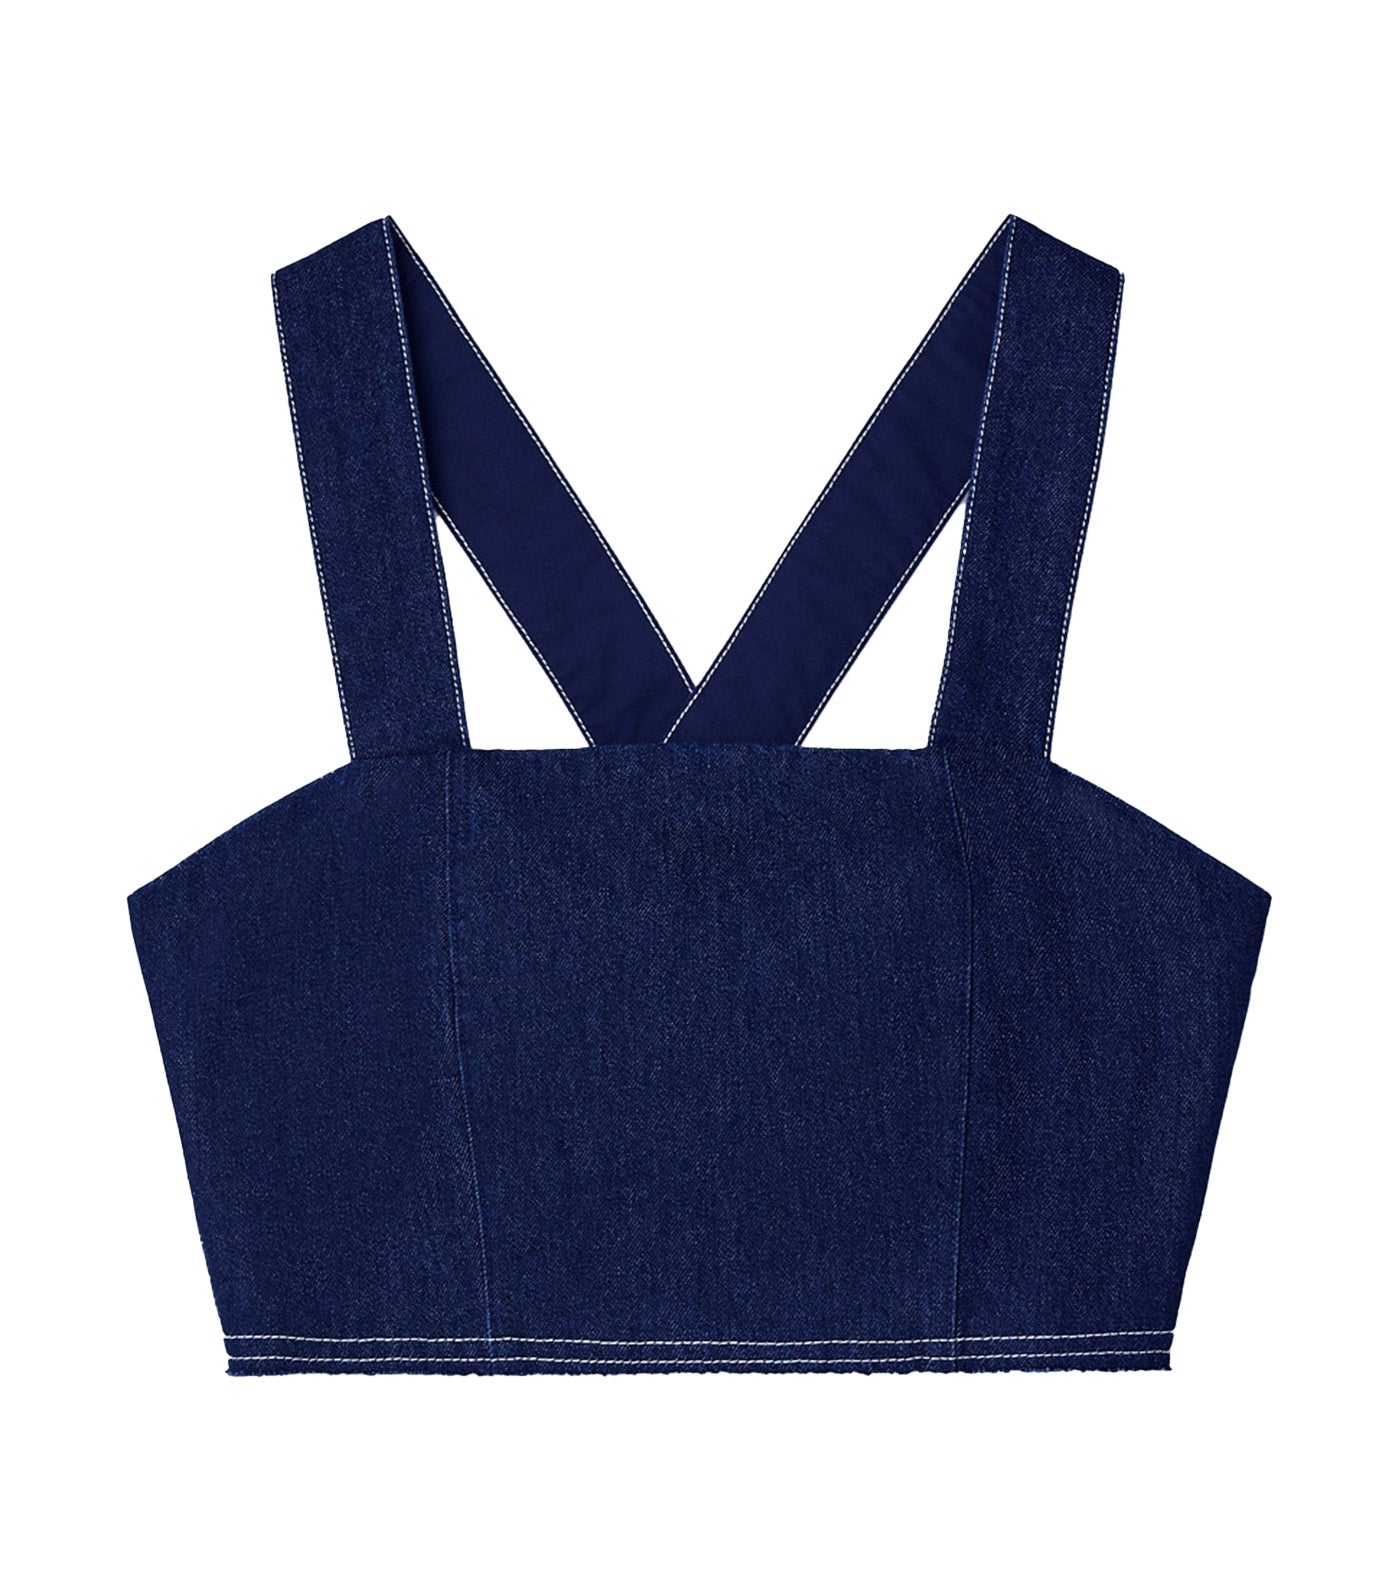 Denim Top with Contrasting Stitching Blue